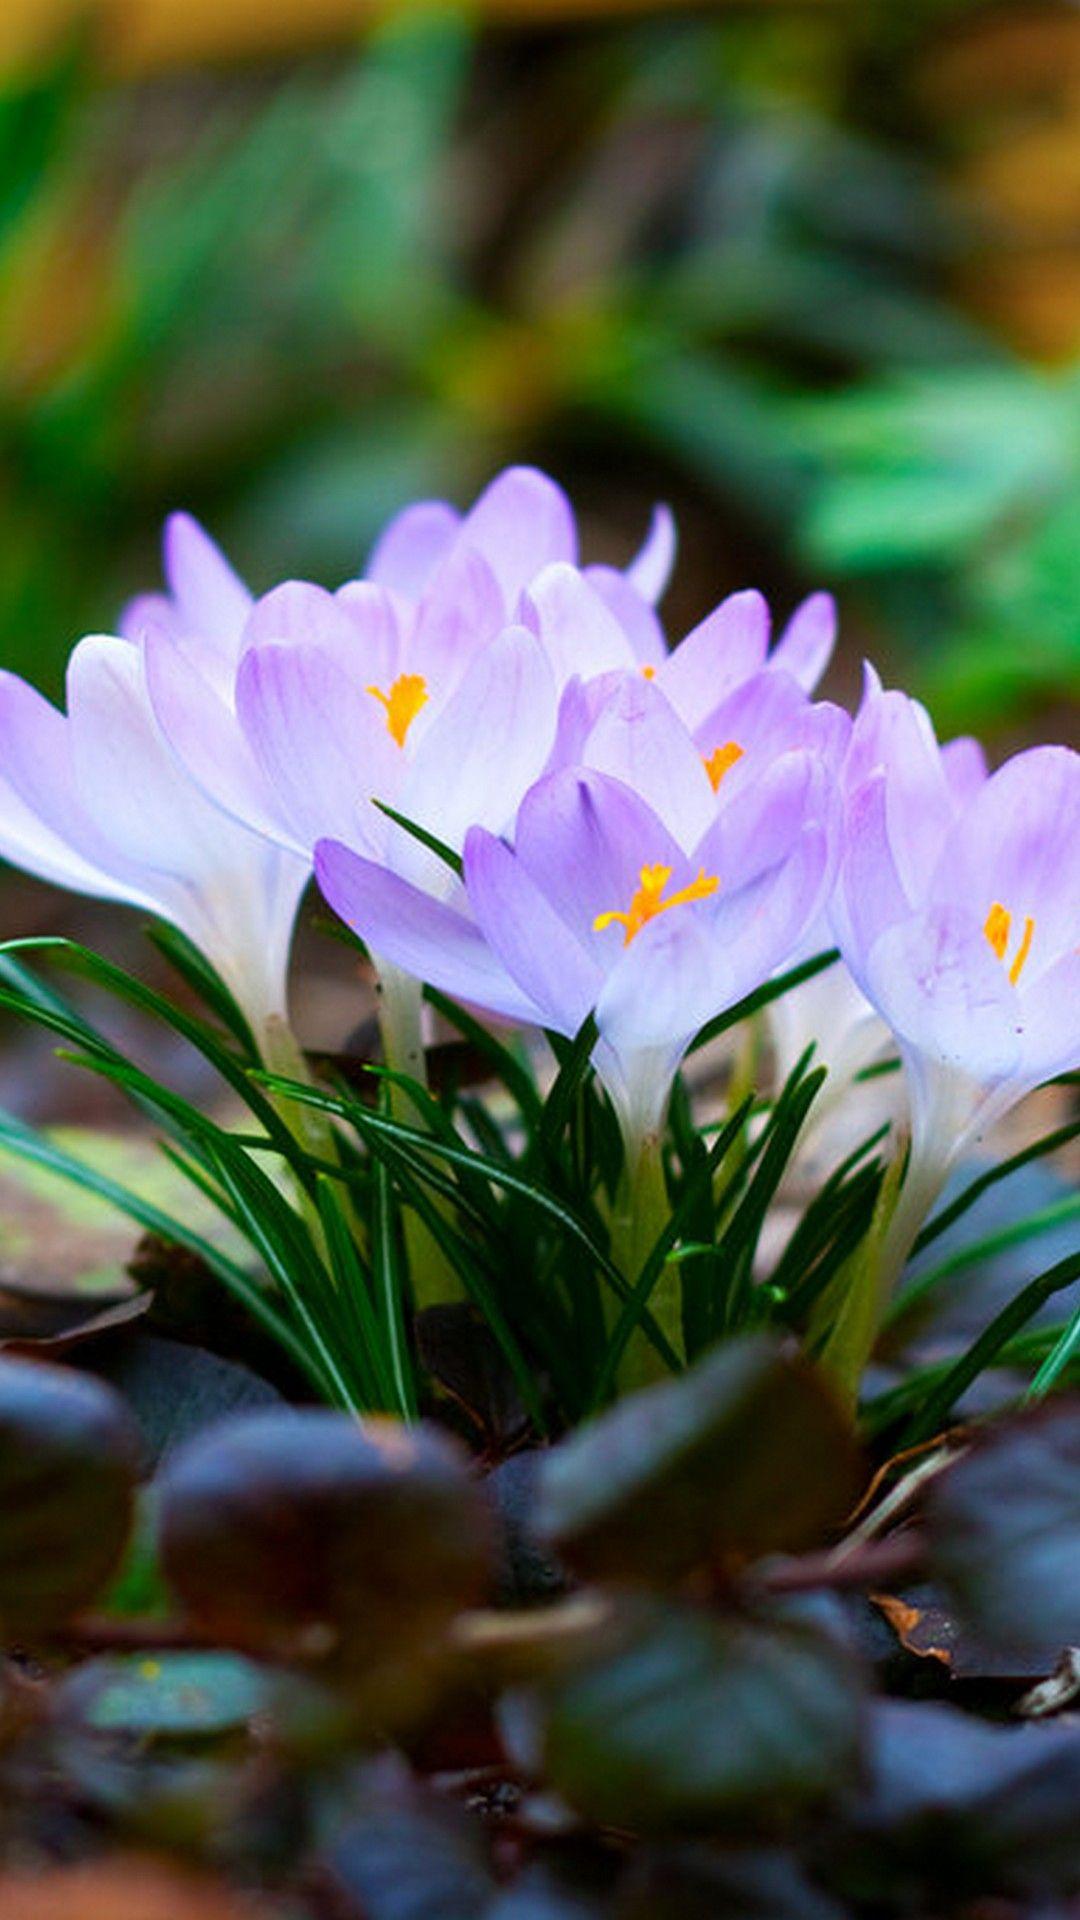 Wallpaper Spring Flowers Android Wallpaper